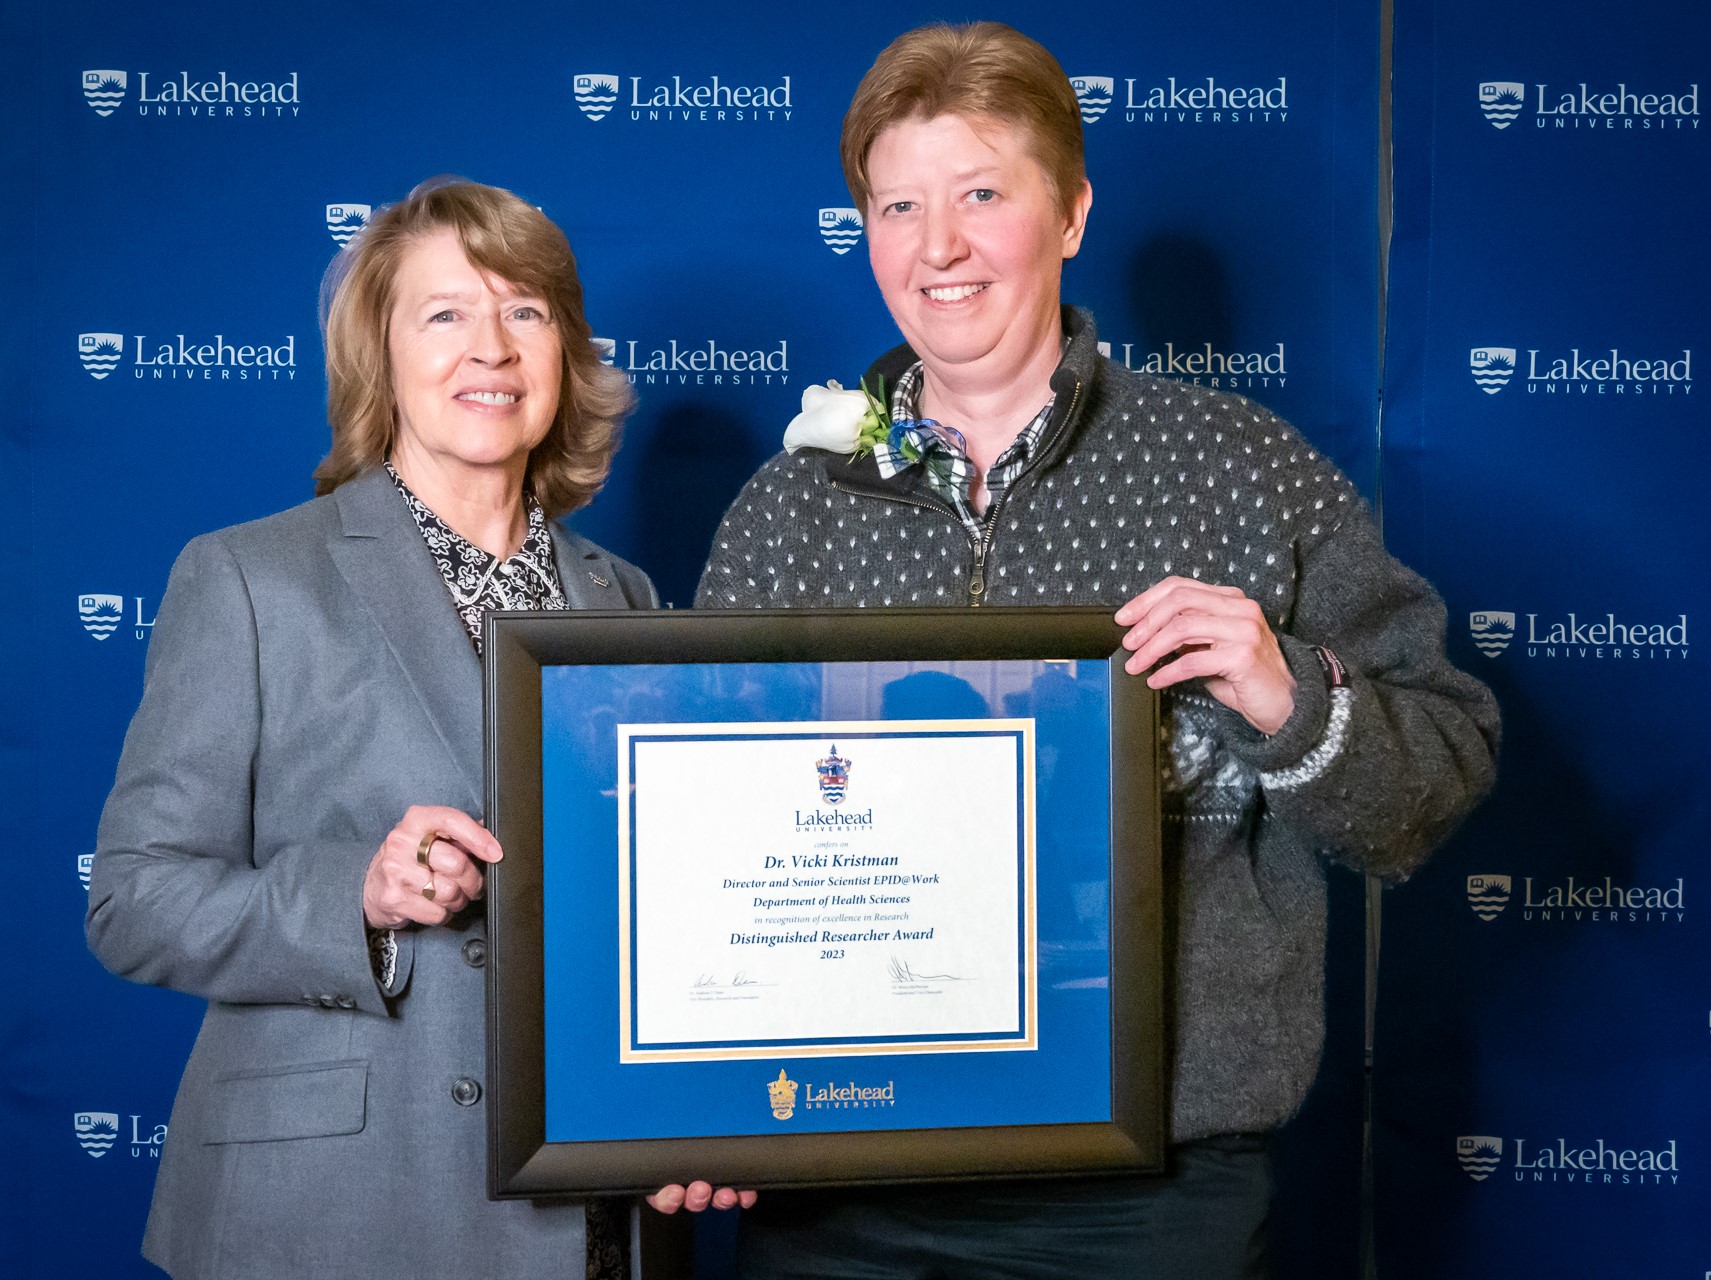 Photo of Distinguished Researcher Award Winner Dr. Vicki Kristman, (CIHR Category), Department of Health Sciences, EPID@Work Director and Senior Scientist, with Dr. Moira McPherson, President and Vice-Chancellor, Lakehead University